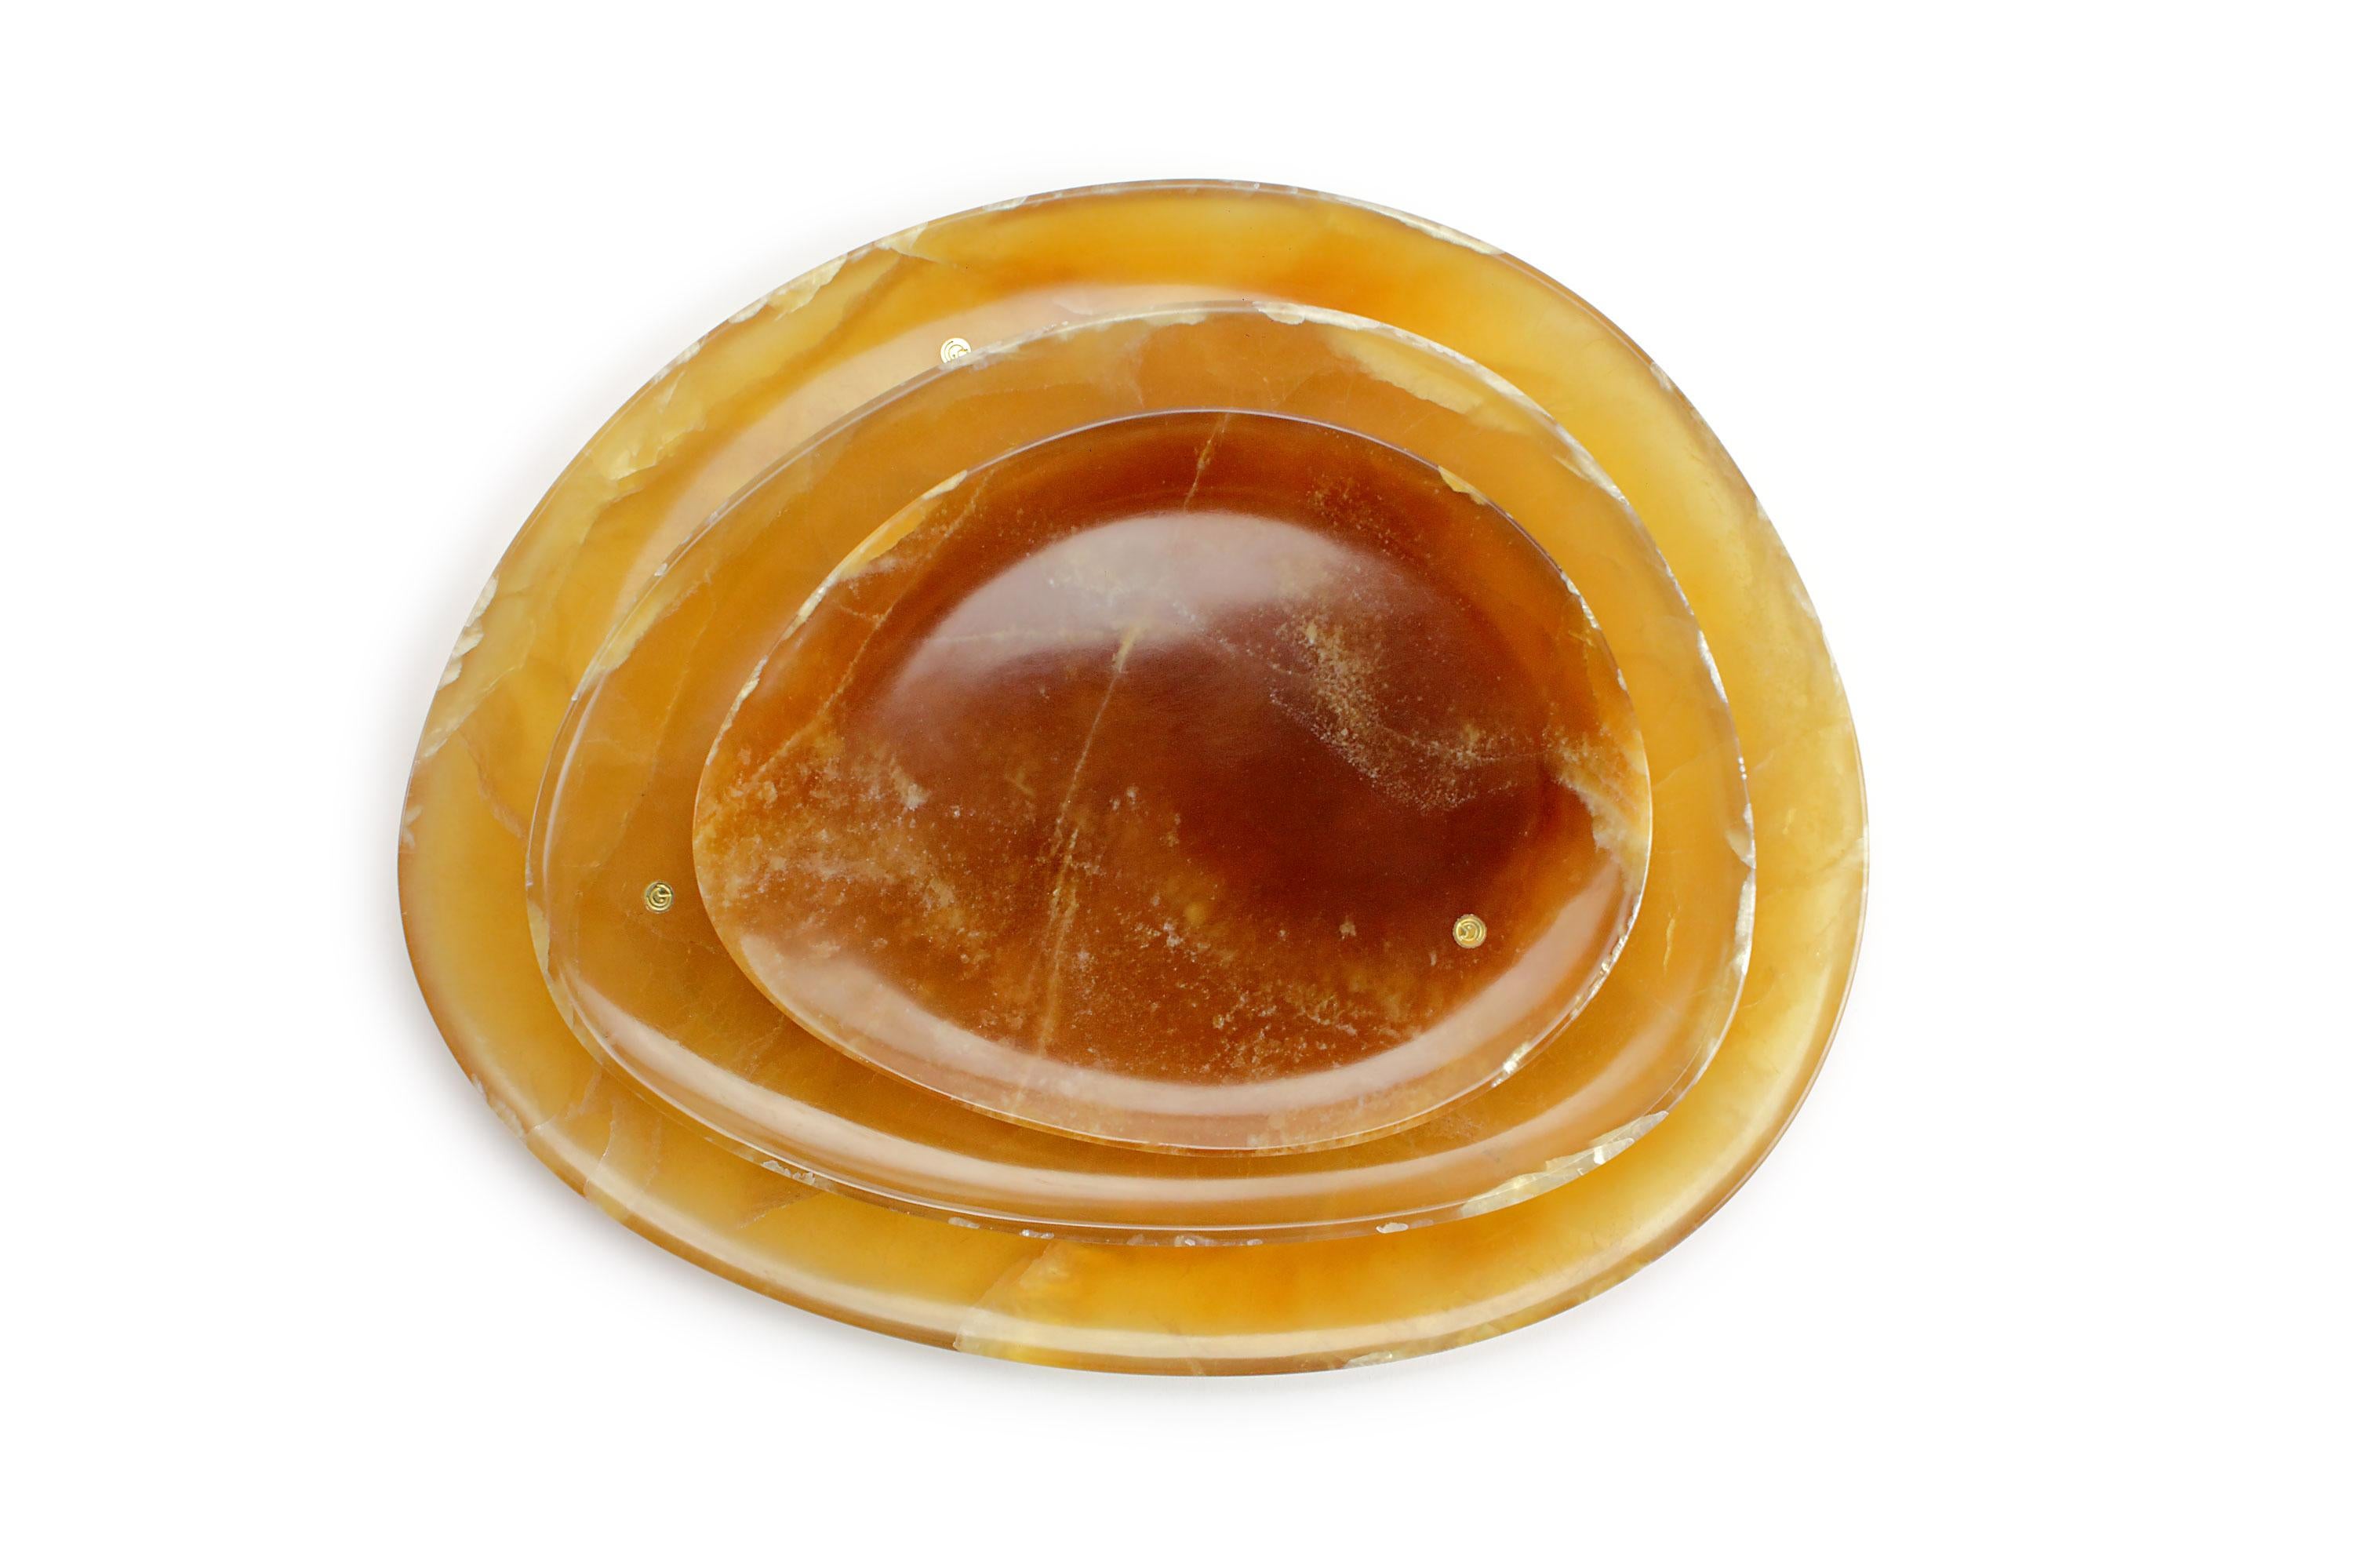 Hand carved presentation plates in Amber Onyx. Multiple use as plates, platters and placers. 

Dimensions: Small - L 24 W 20 H 1.8 cm, Medium - L 30 W 28 H 1.8 cm and Big - L 36 W 35 H 1.8 cm.
Available in different marbles, onyx and quartzite.